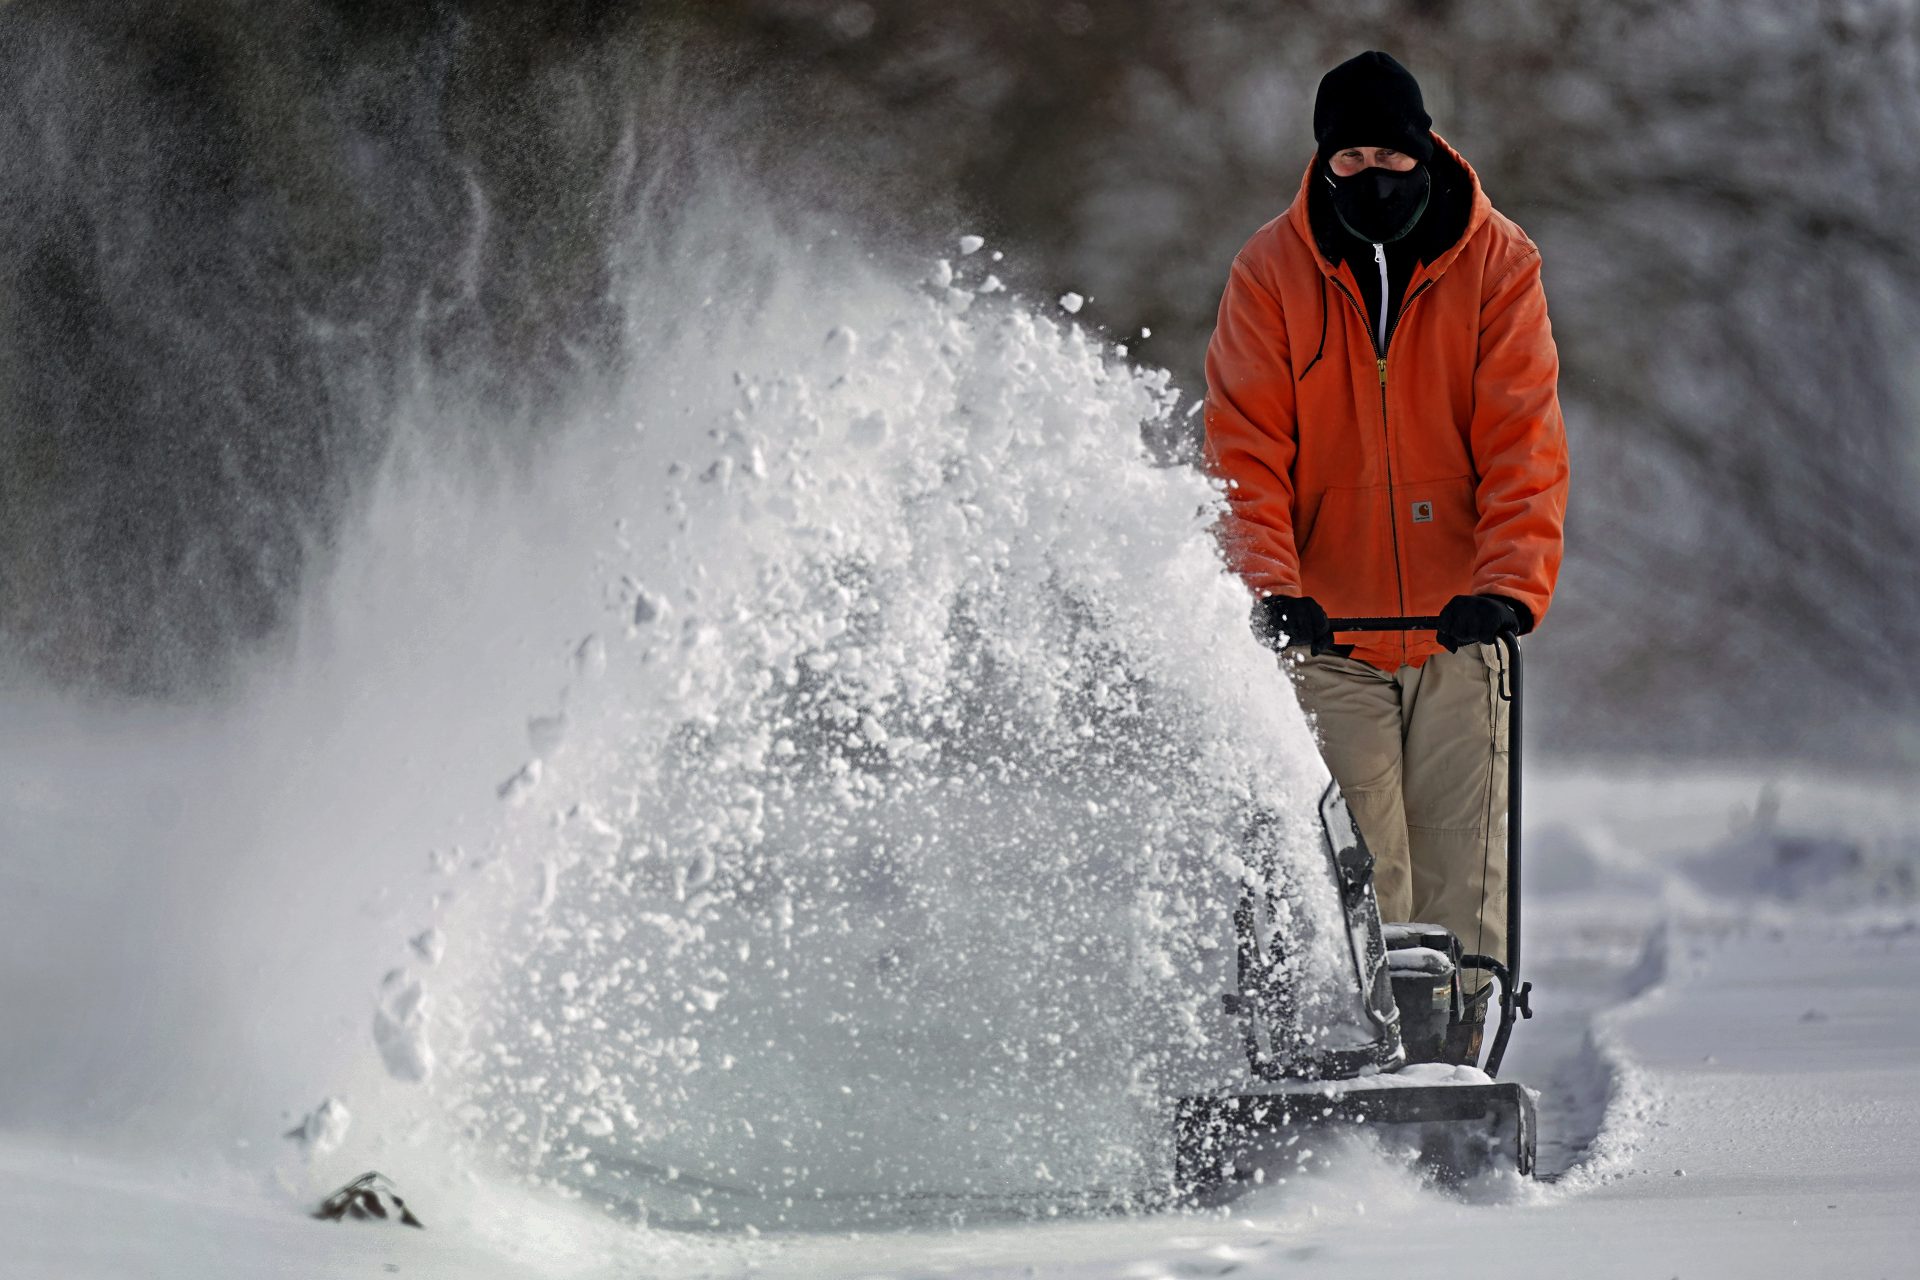 John Tapko clears snow at his house Wednesday, Feb. 2, 2022, in Overland Park, Kan.